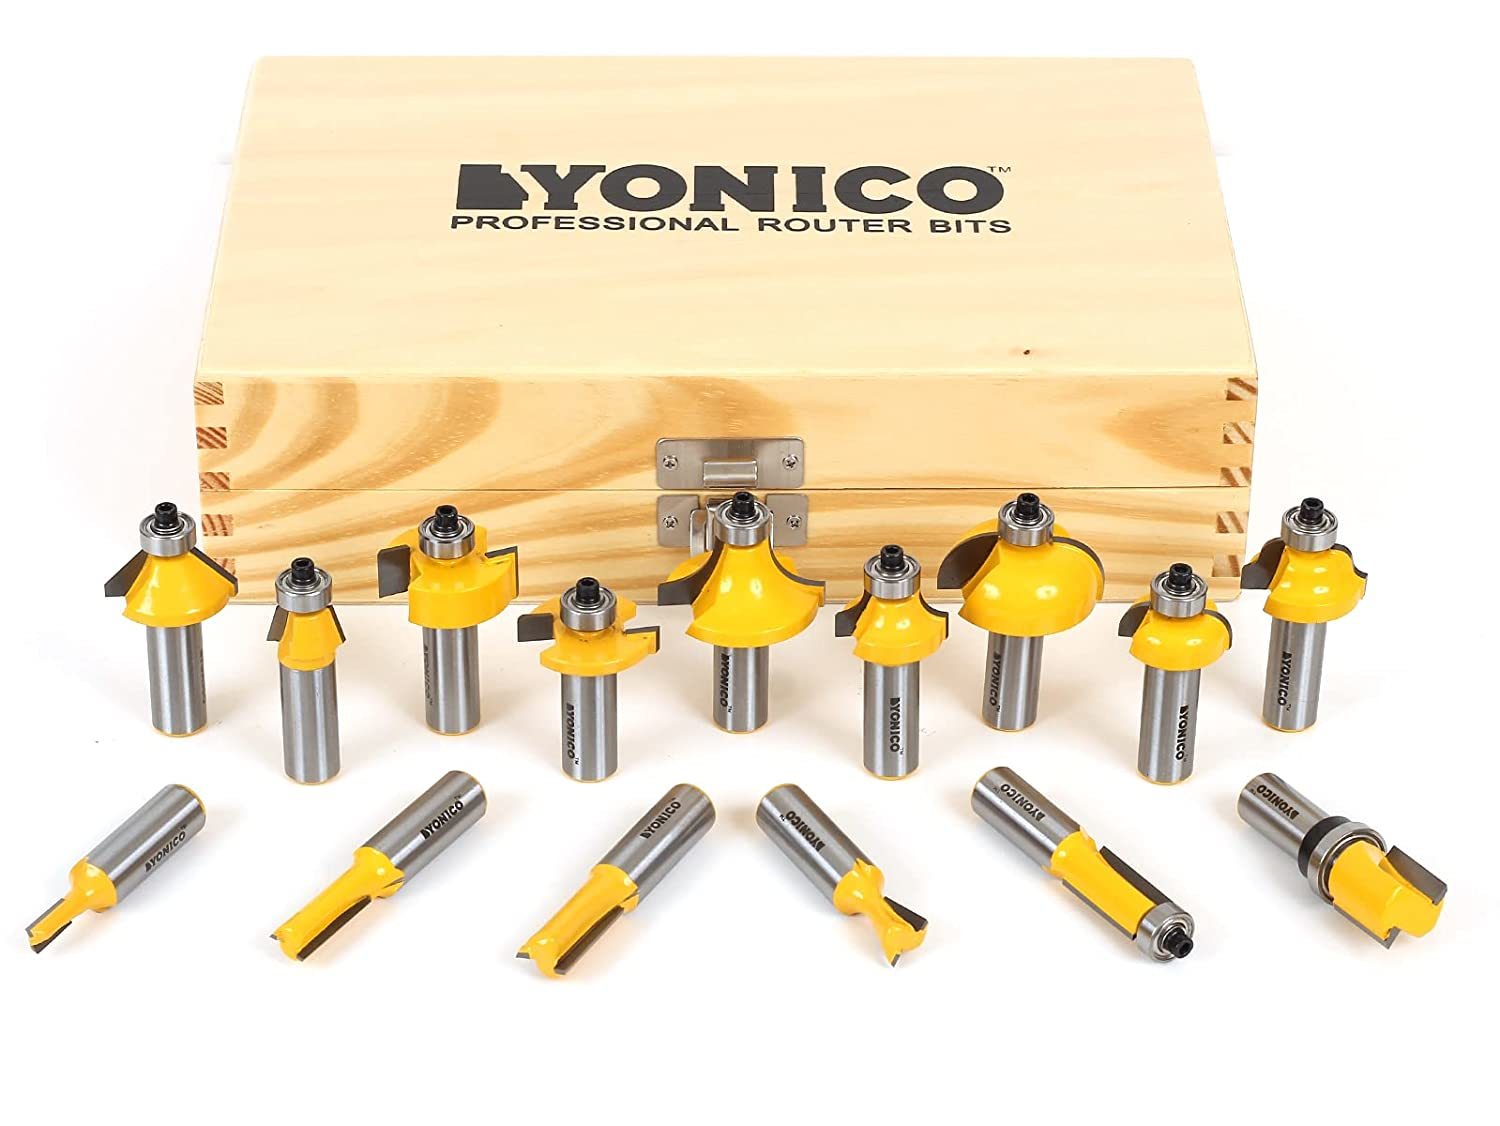 Primary image for Yonico Router Bits Set 15 Bit 1/2-Inch Shank 17150 Professional Carbide Tipped